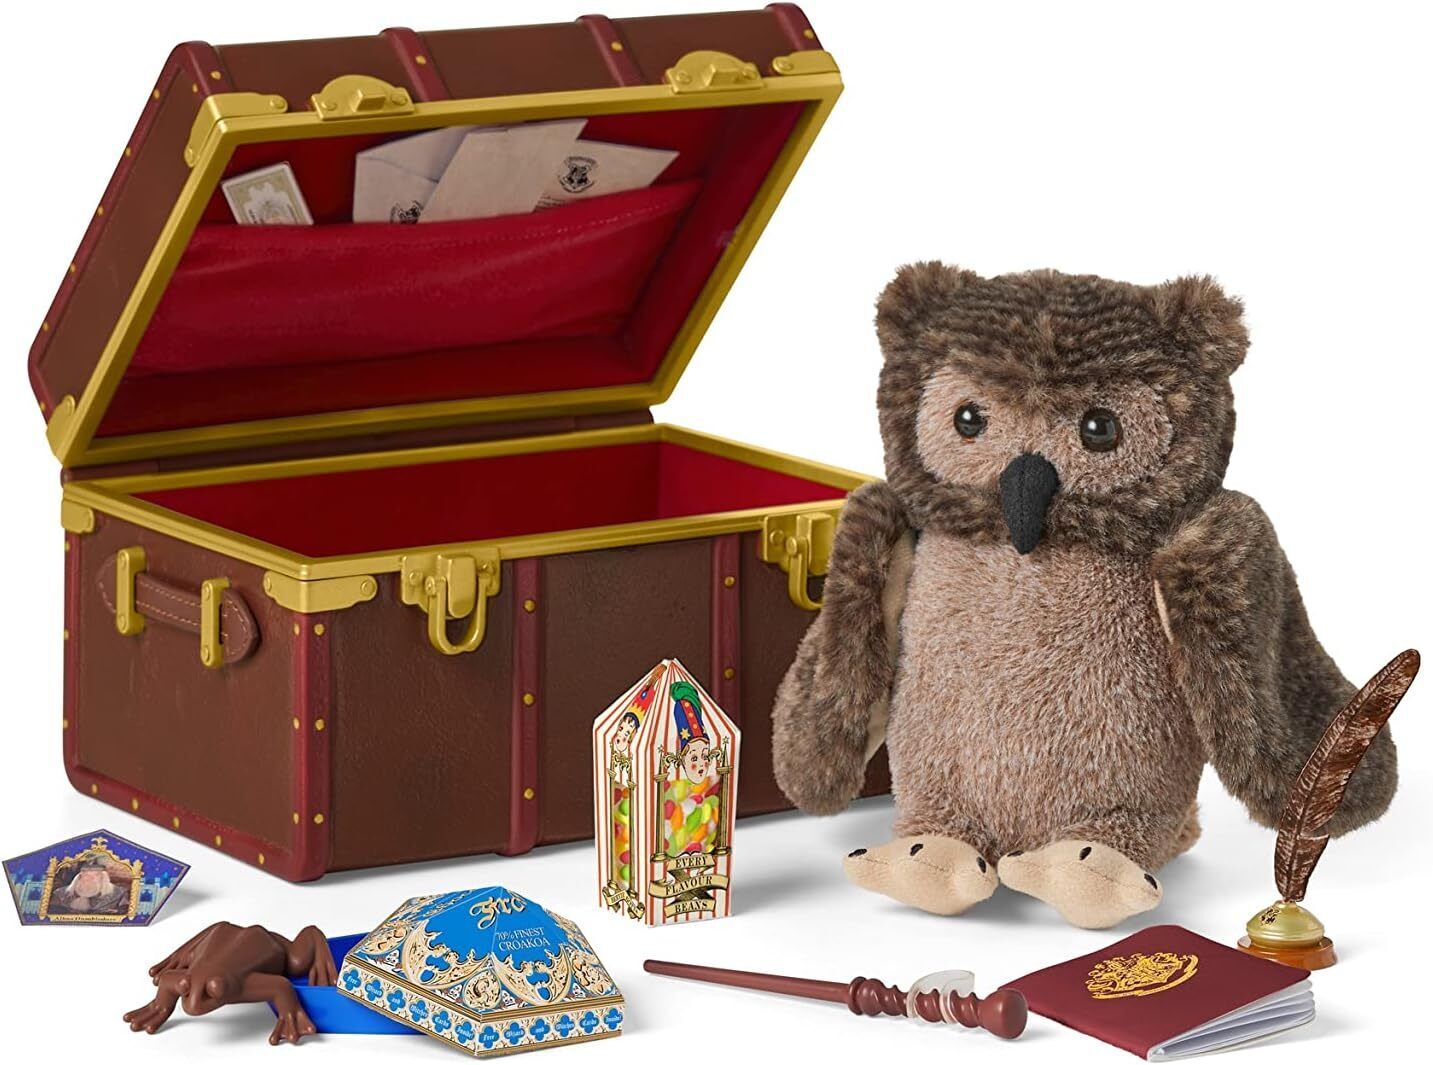 American Girl Harry Potter 18-inch Doll Hogwarts Playset with Plush Owl, Wand, T